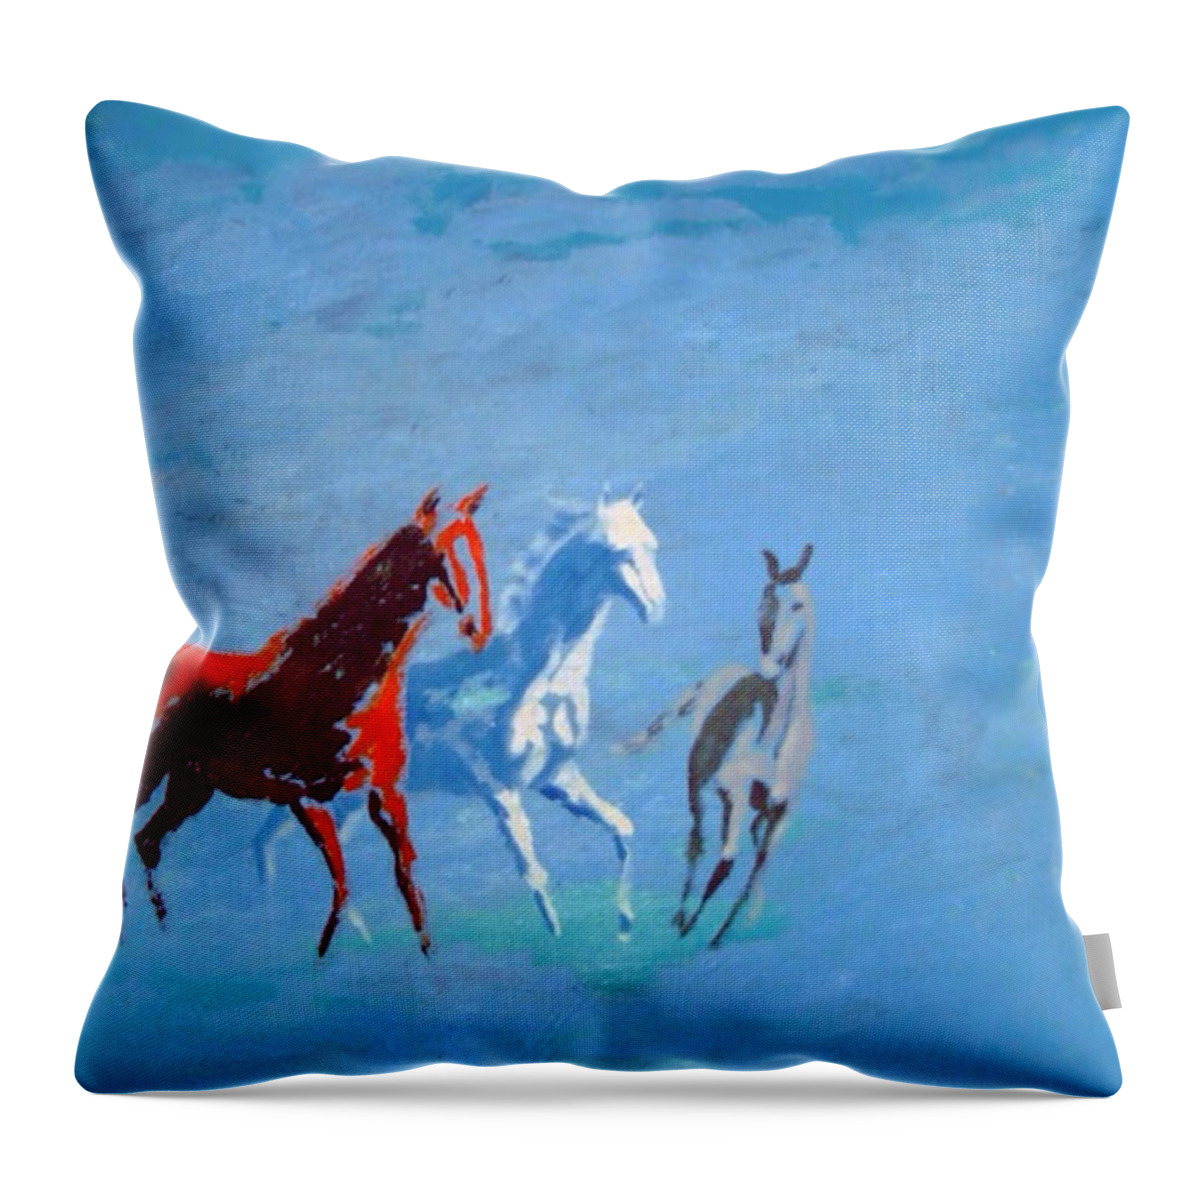 Horses Throw Pillow featuring the painting Il futuro ci viene incontro by Enrico Garff